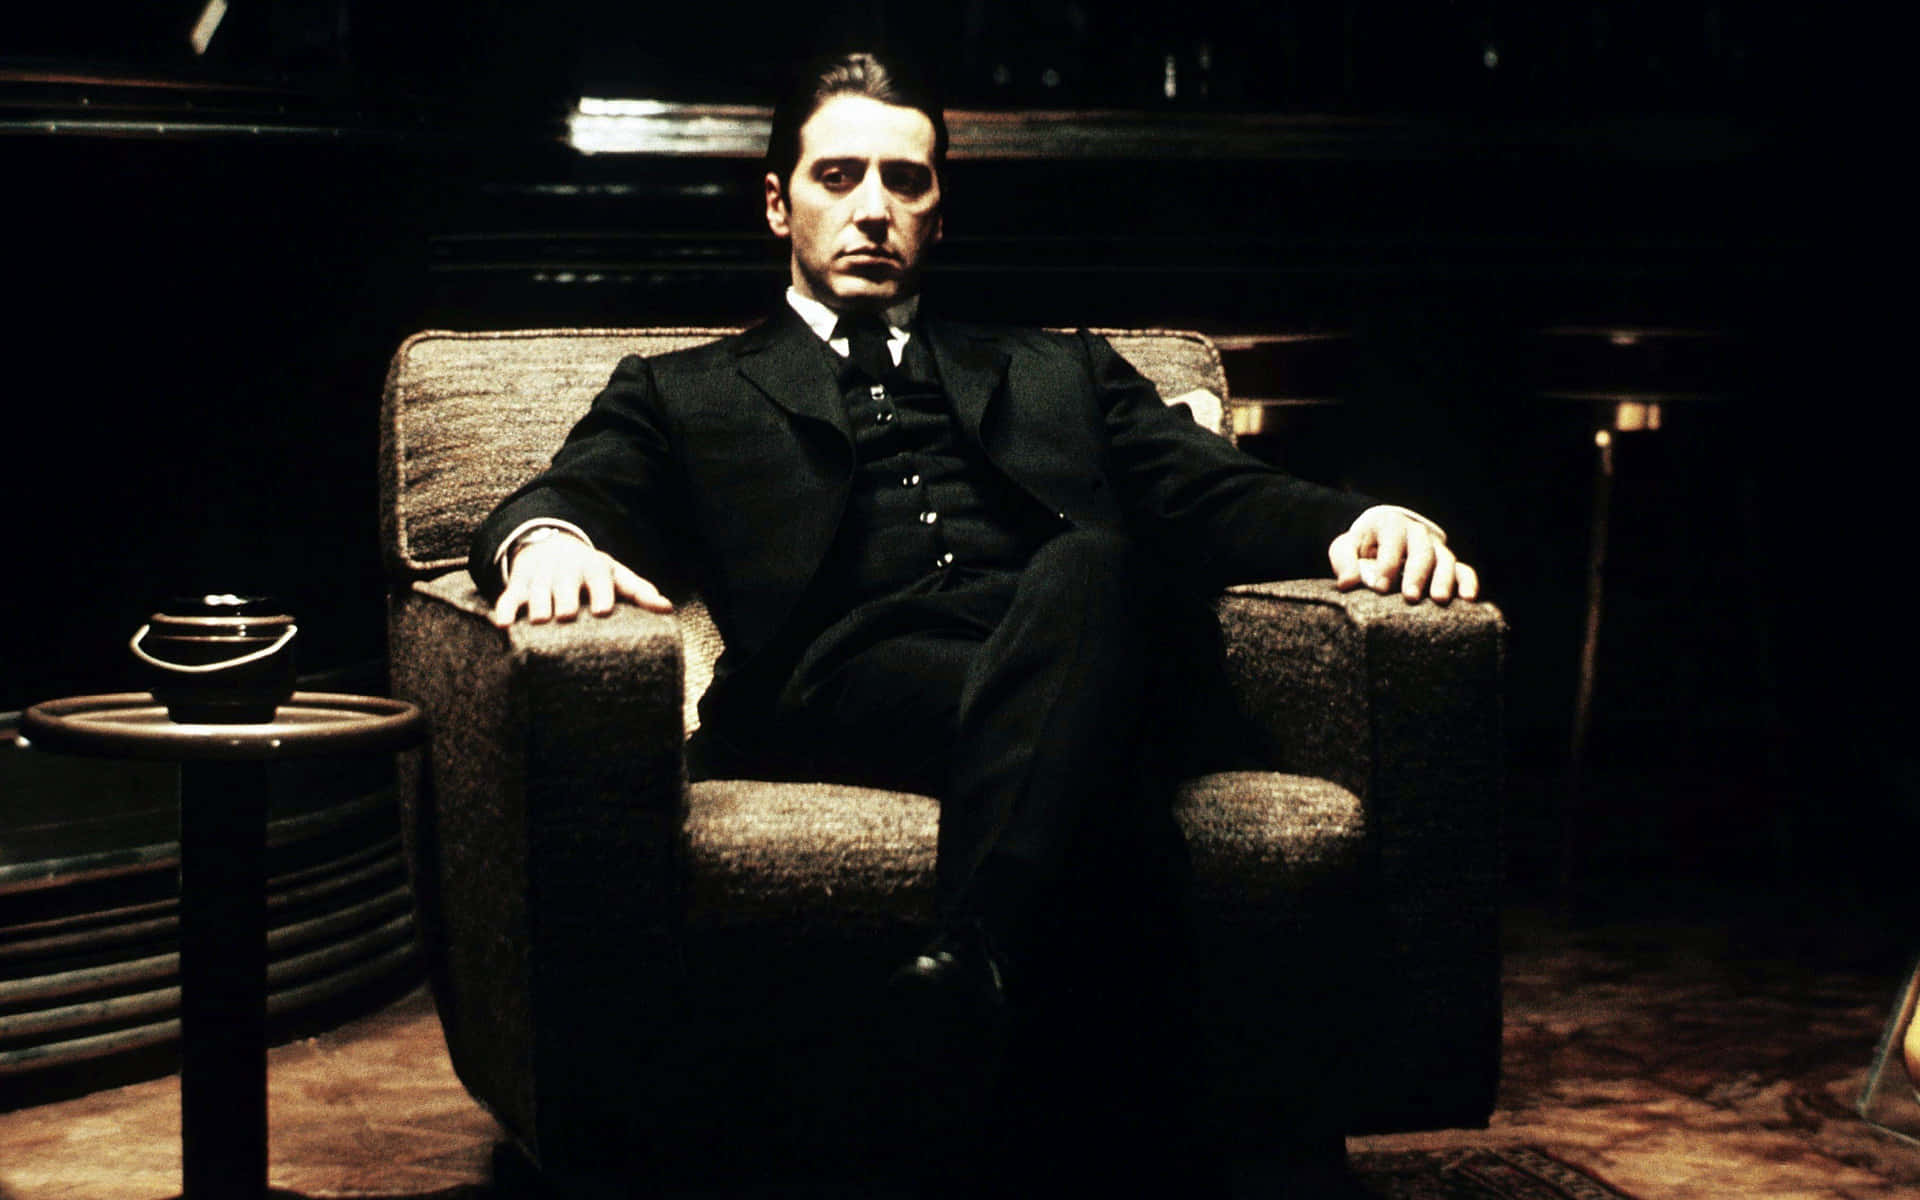 Al Pacino in his iconic pose